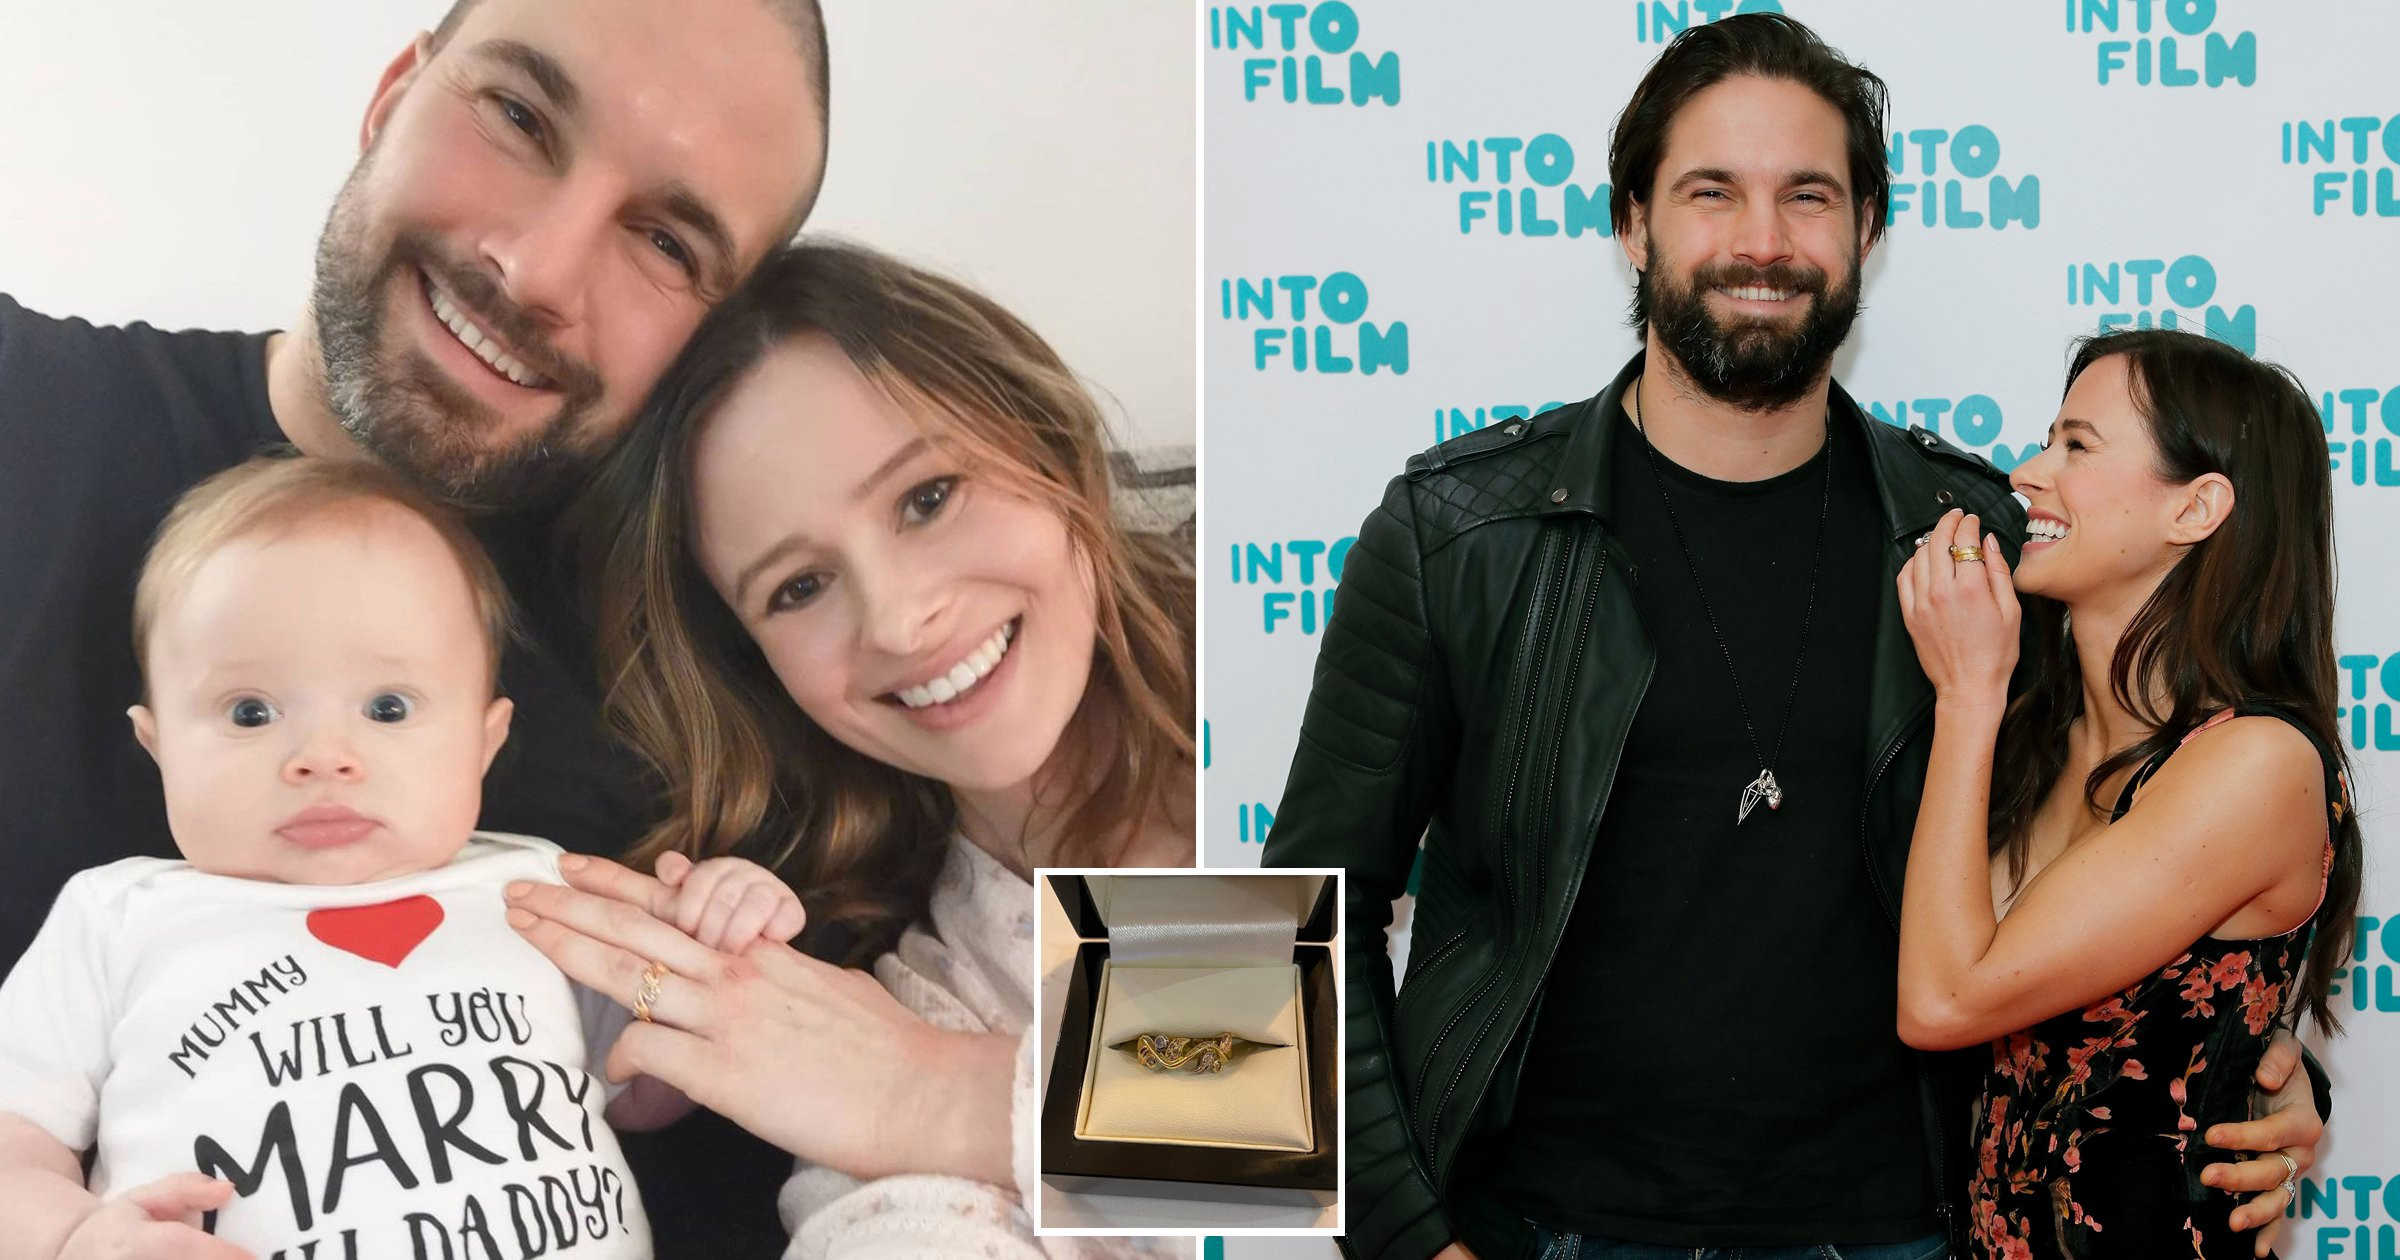 Love Island’s Camilla Thurlow and Jamie Jewitt get engaged as she unveils stunning ring he designed